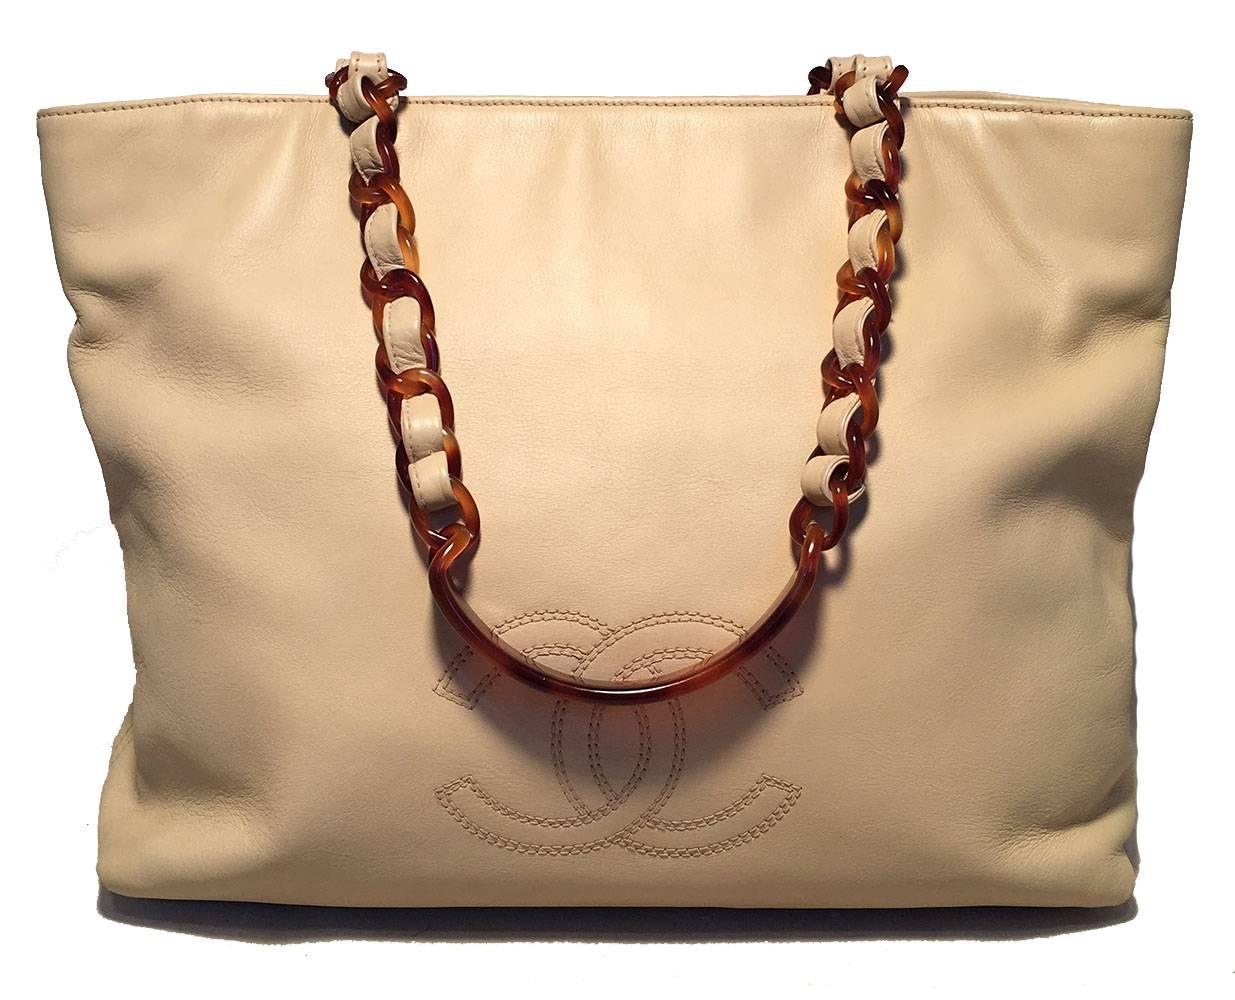 BEAUTIFUL Chanel Vintage Beige Leather Tortoiseshell Chain Strap Shoulder Bag Tote in very good condition.  Beige lambskin leather exterior with CC logo quilted along the front side. Acrylic tortoiseshell chain link shoulder straps in excellent